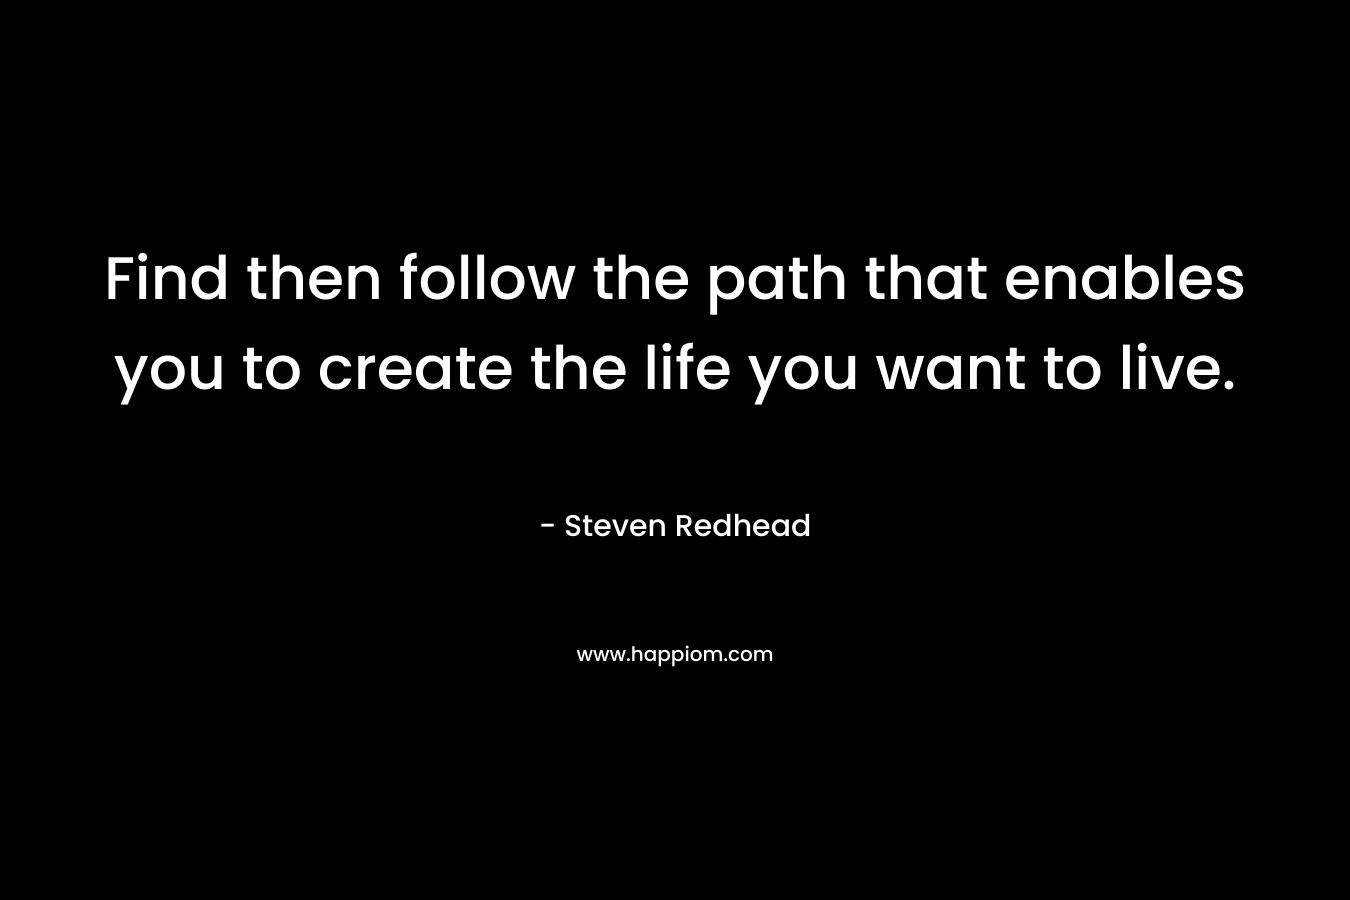 Find then follow the path that enables you to create the life you want to live.